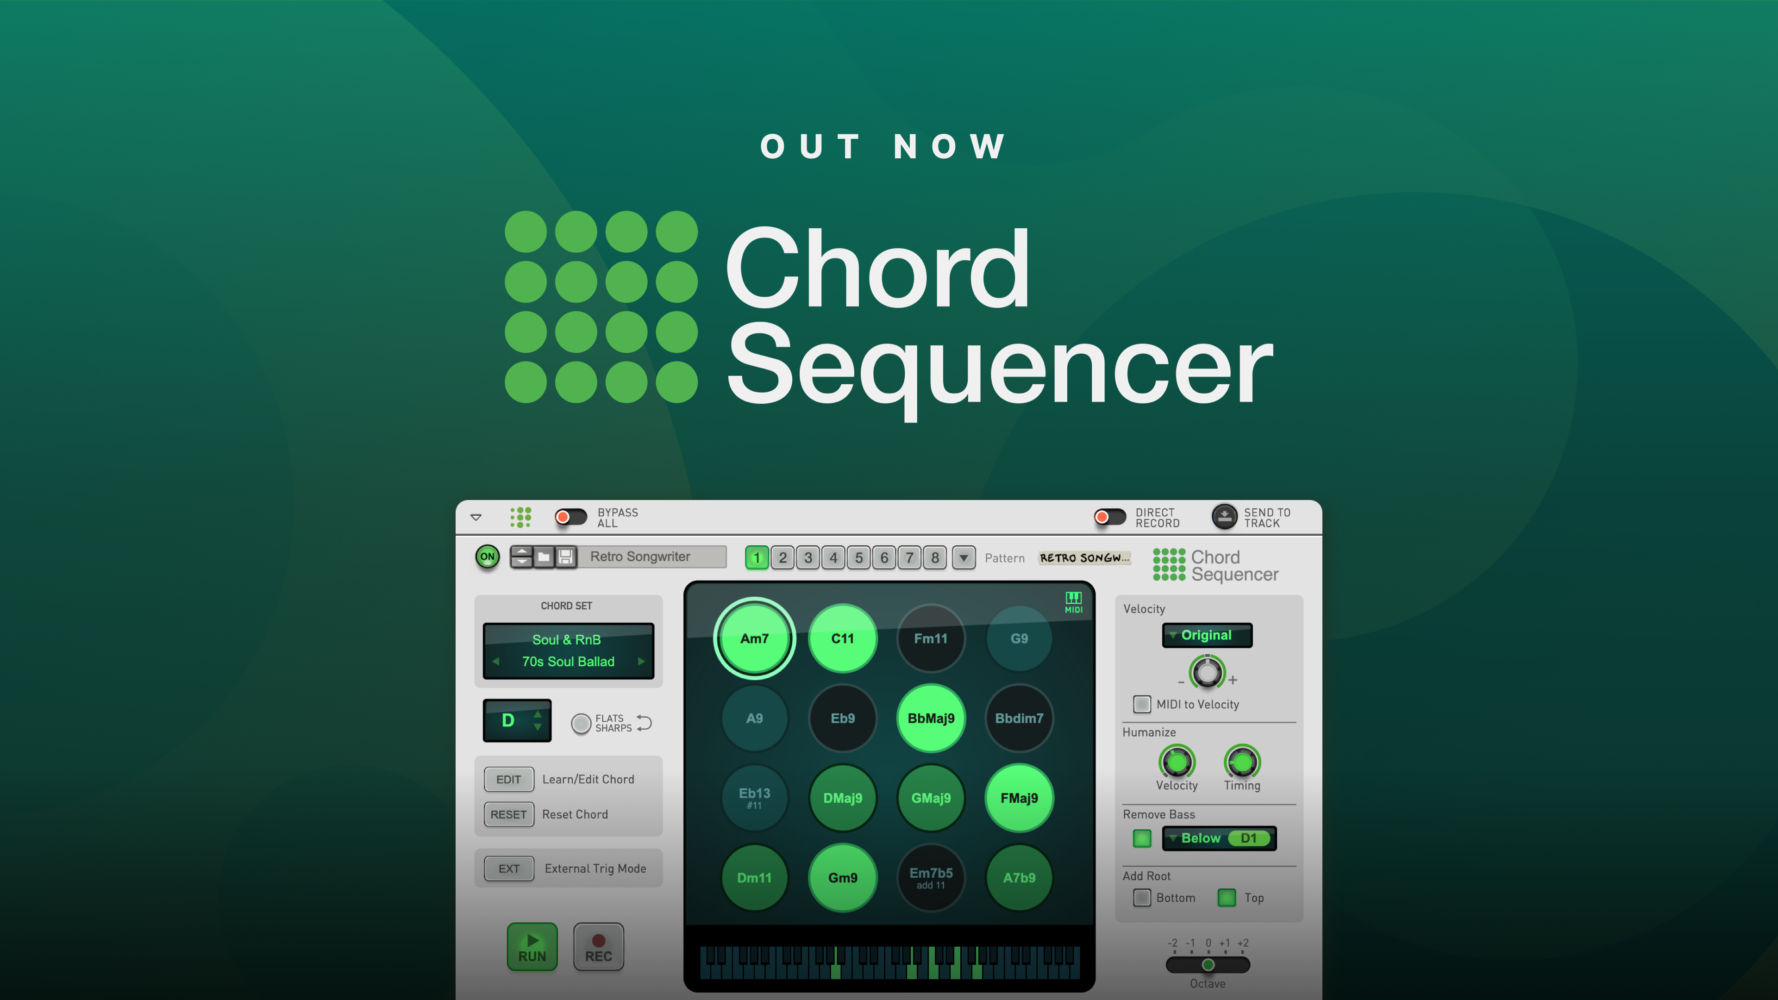 Making the Chord Sequencer